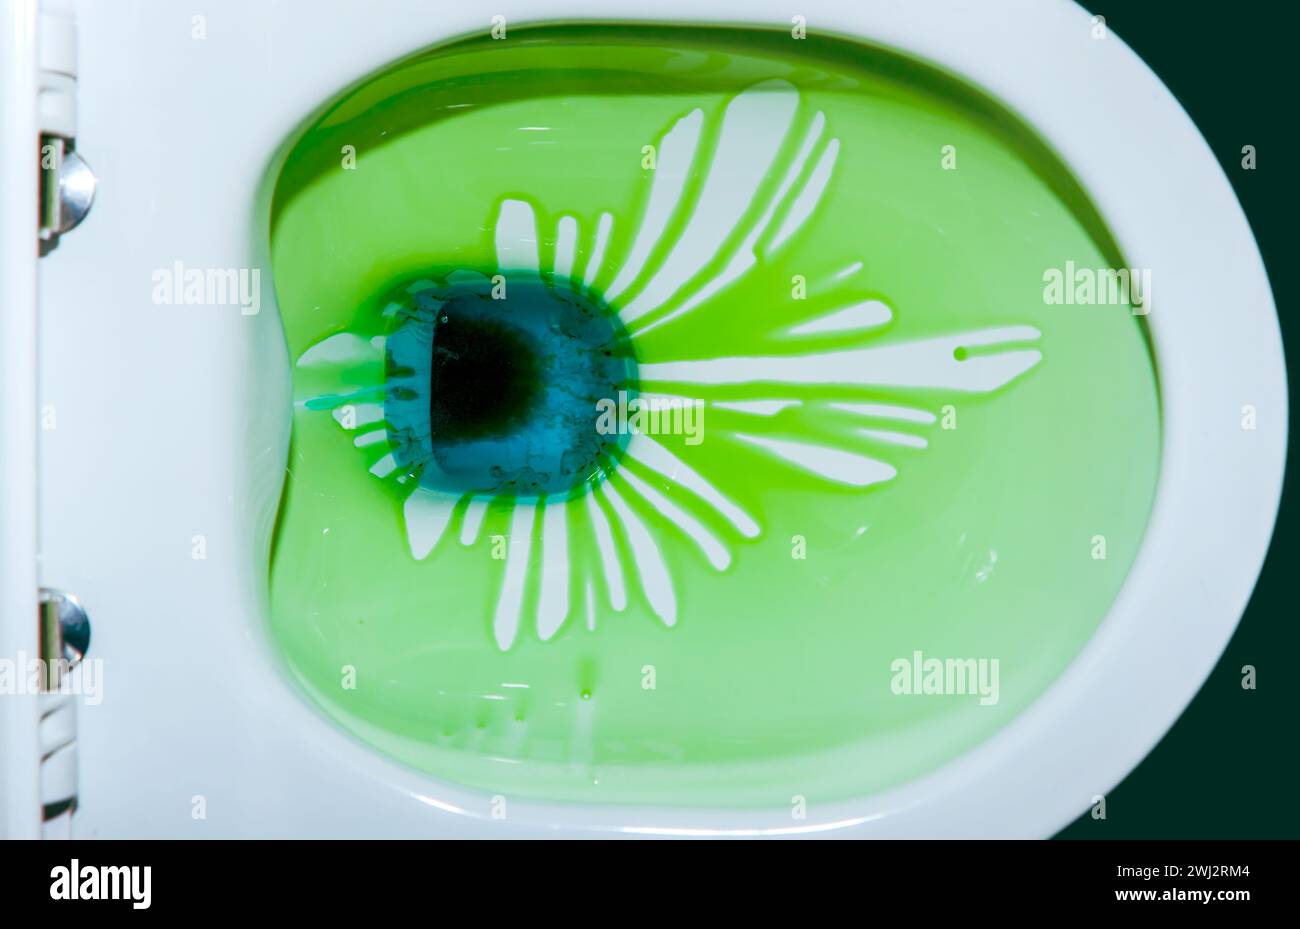 Toilet bowl with green cleaning fluid. cleaning Toilet close-up. Environmental pollution concept Stock Photo